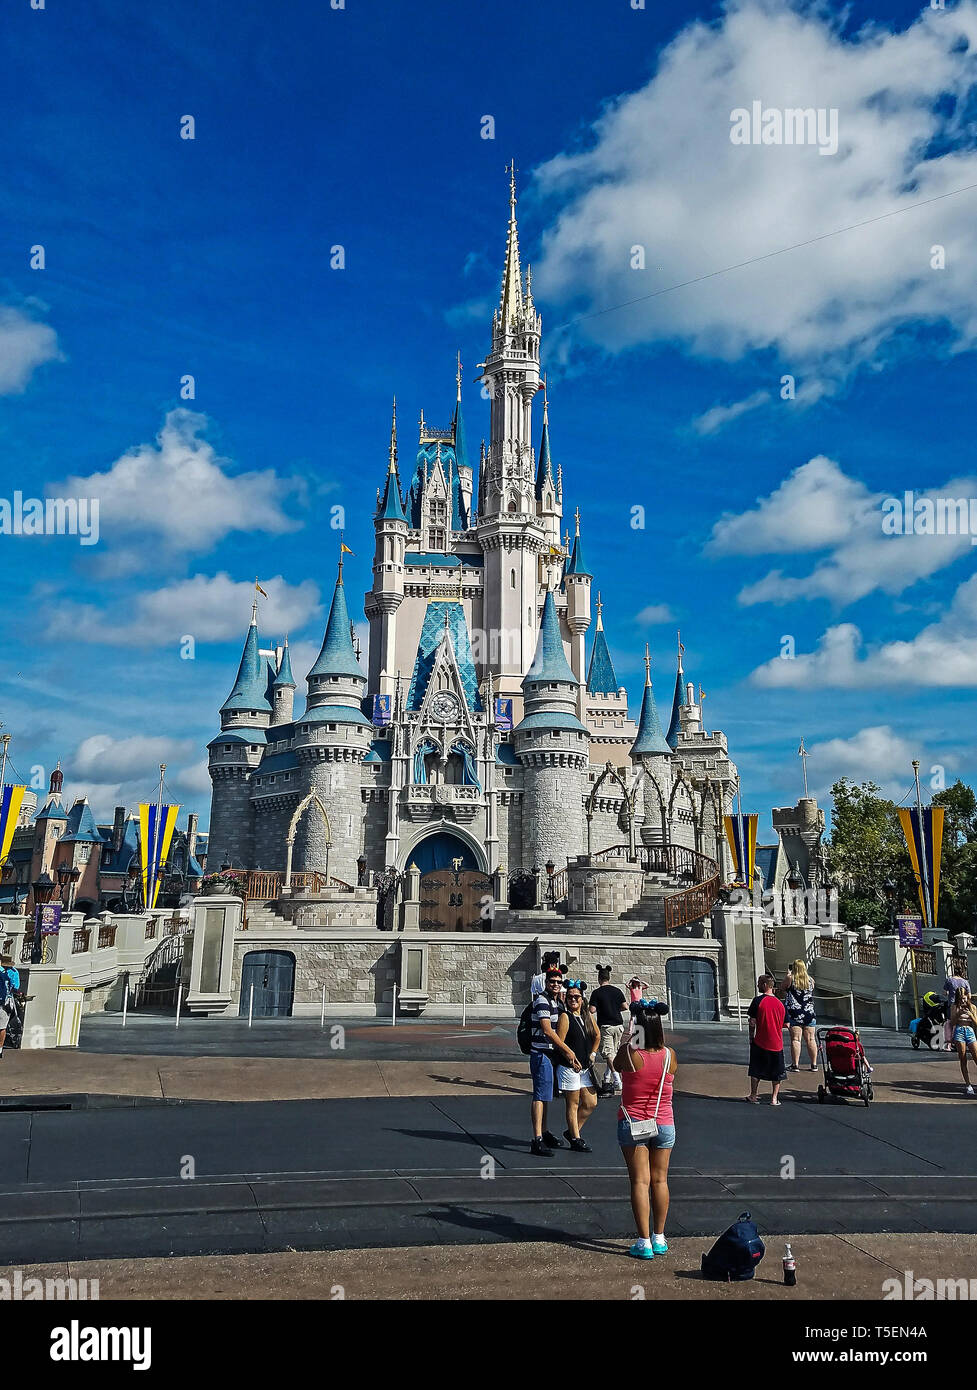 Orlando, FL/USA - 03/01/18: Vertical view of a couple wearing mickey mouse ears getting their photo taken in front of Cinderellas Castle. Stock Photo